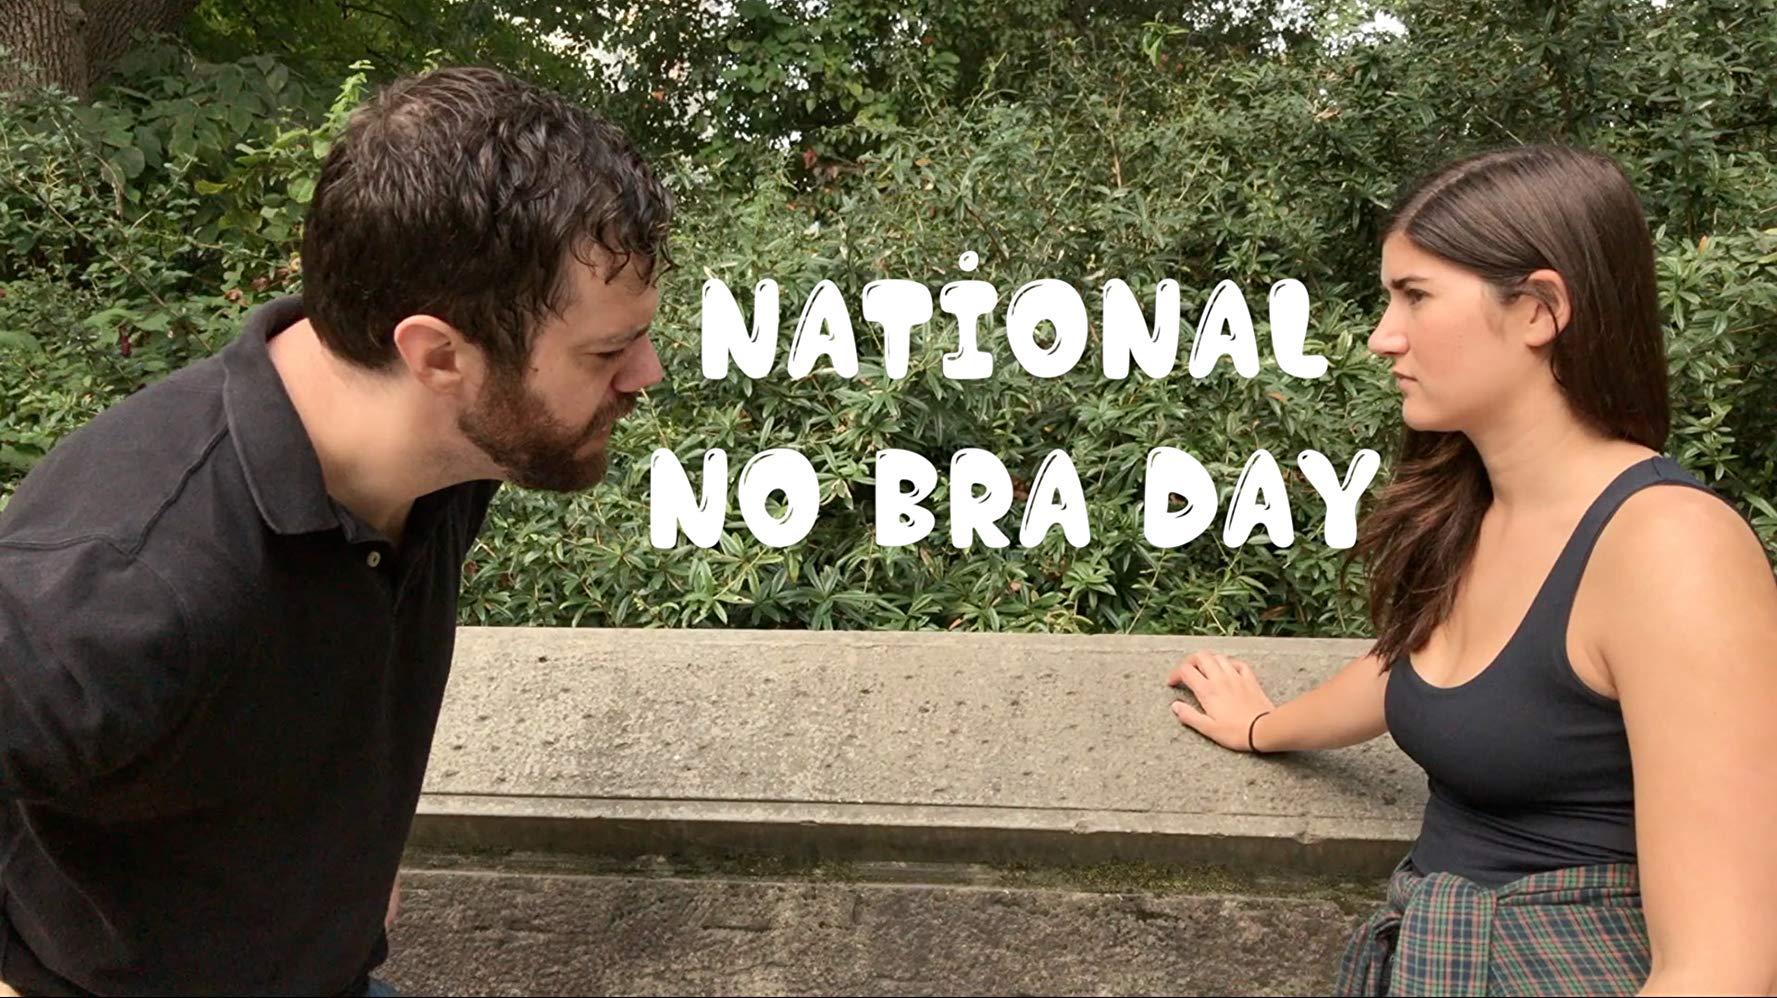 Women Posts Photos Of Themselves Braless As They Celebrate 'No Bra Day' .